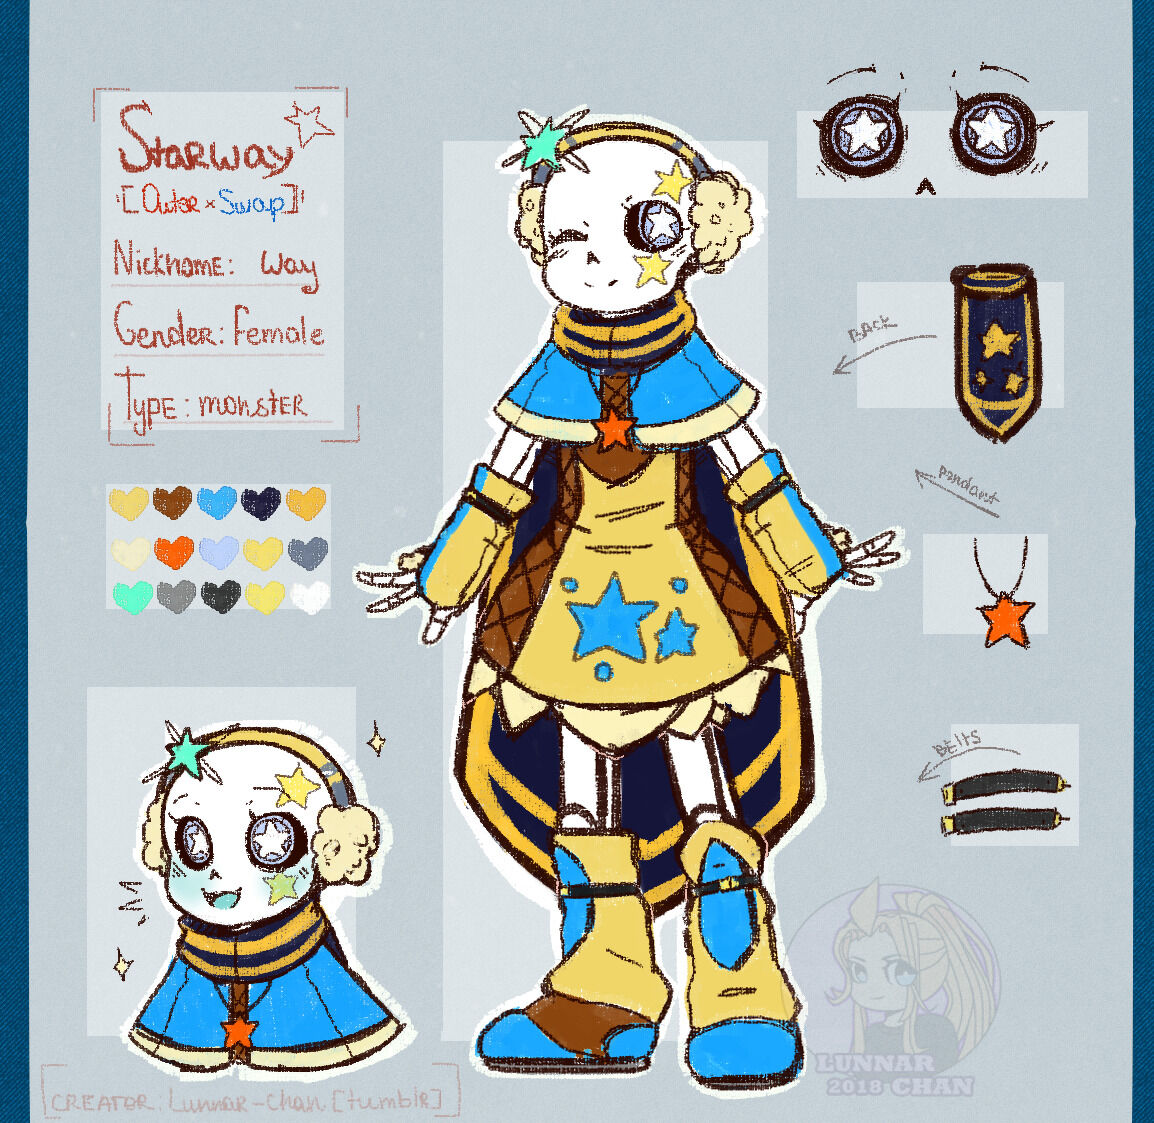 Sans Au Ship Children you probably didn't know existed, Undertale AU  Offspring Wiki